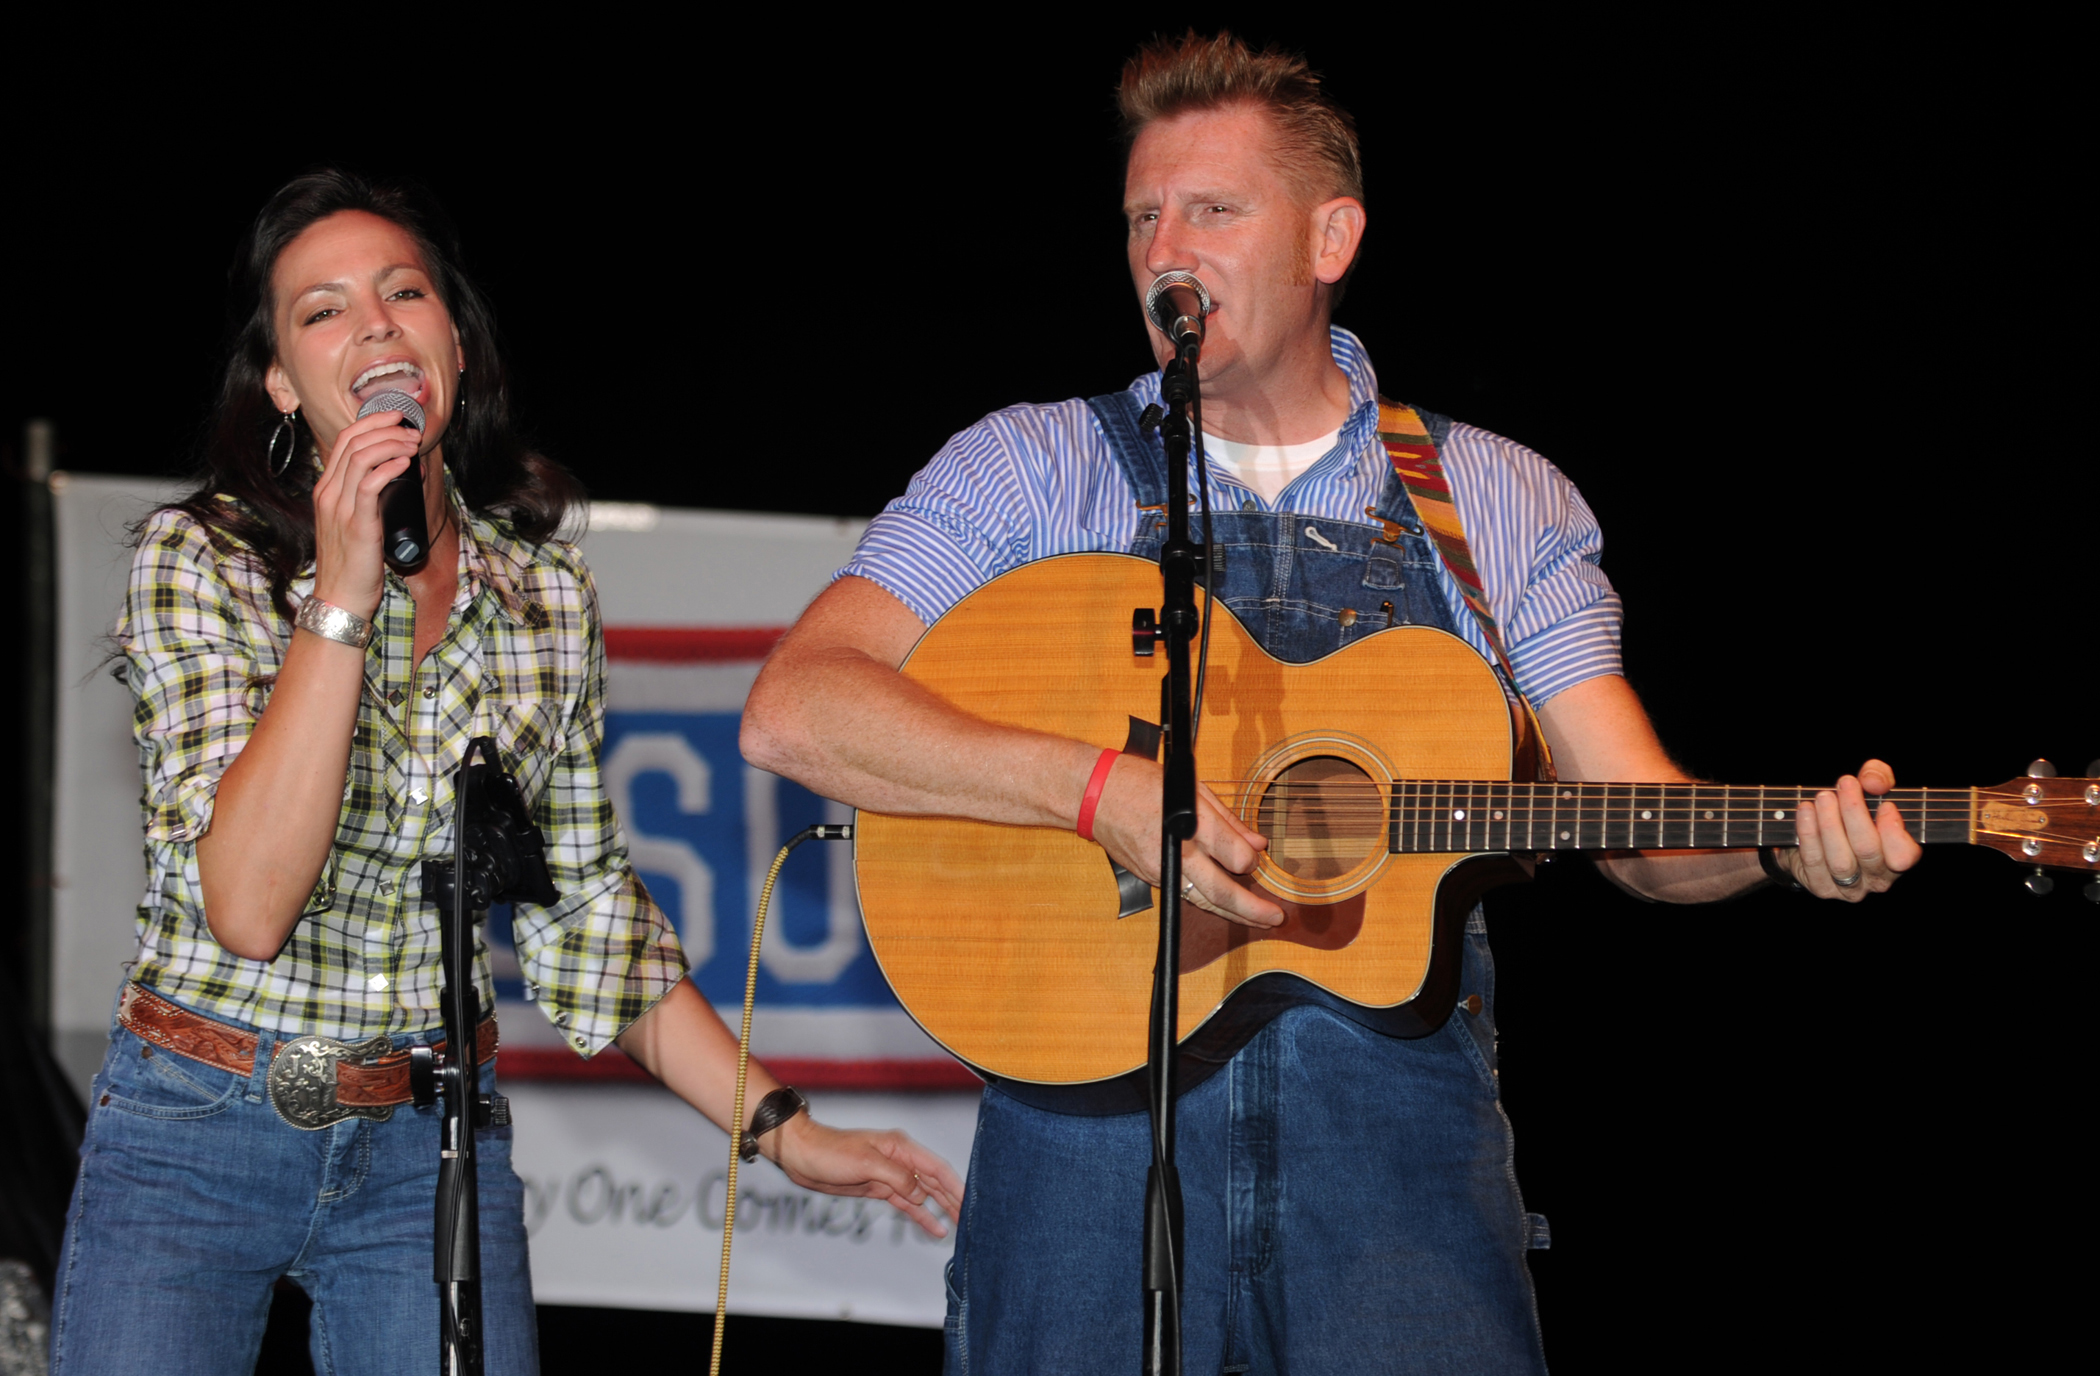 100704-A-9737A-060 GUANTANAMO BAY, Cuba (July 4, 2010) The country music group, Joey and Rory, perform for service members at Joint Task Force Guantanamo and the Naval Station Guantanamo Bay community. The event was sponsored by the base Morale, Welfare and Recreation office. (U.S. Army photo by Sgt. Tiffany Addair/Released)